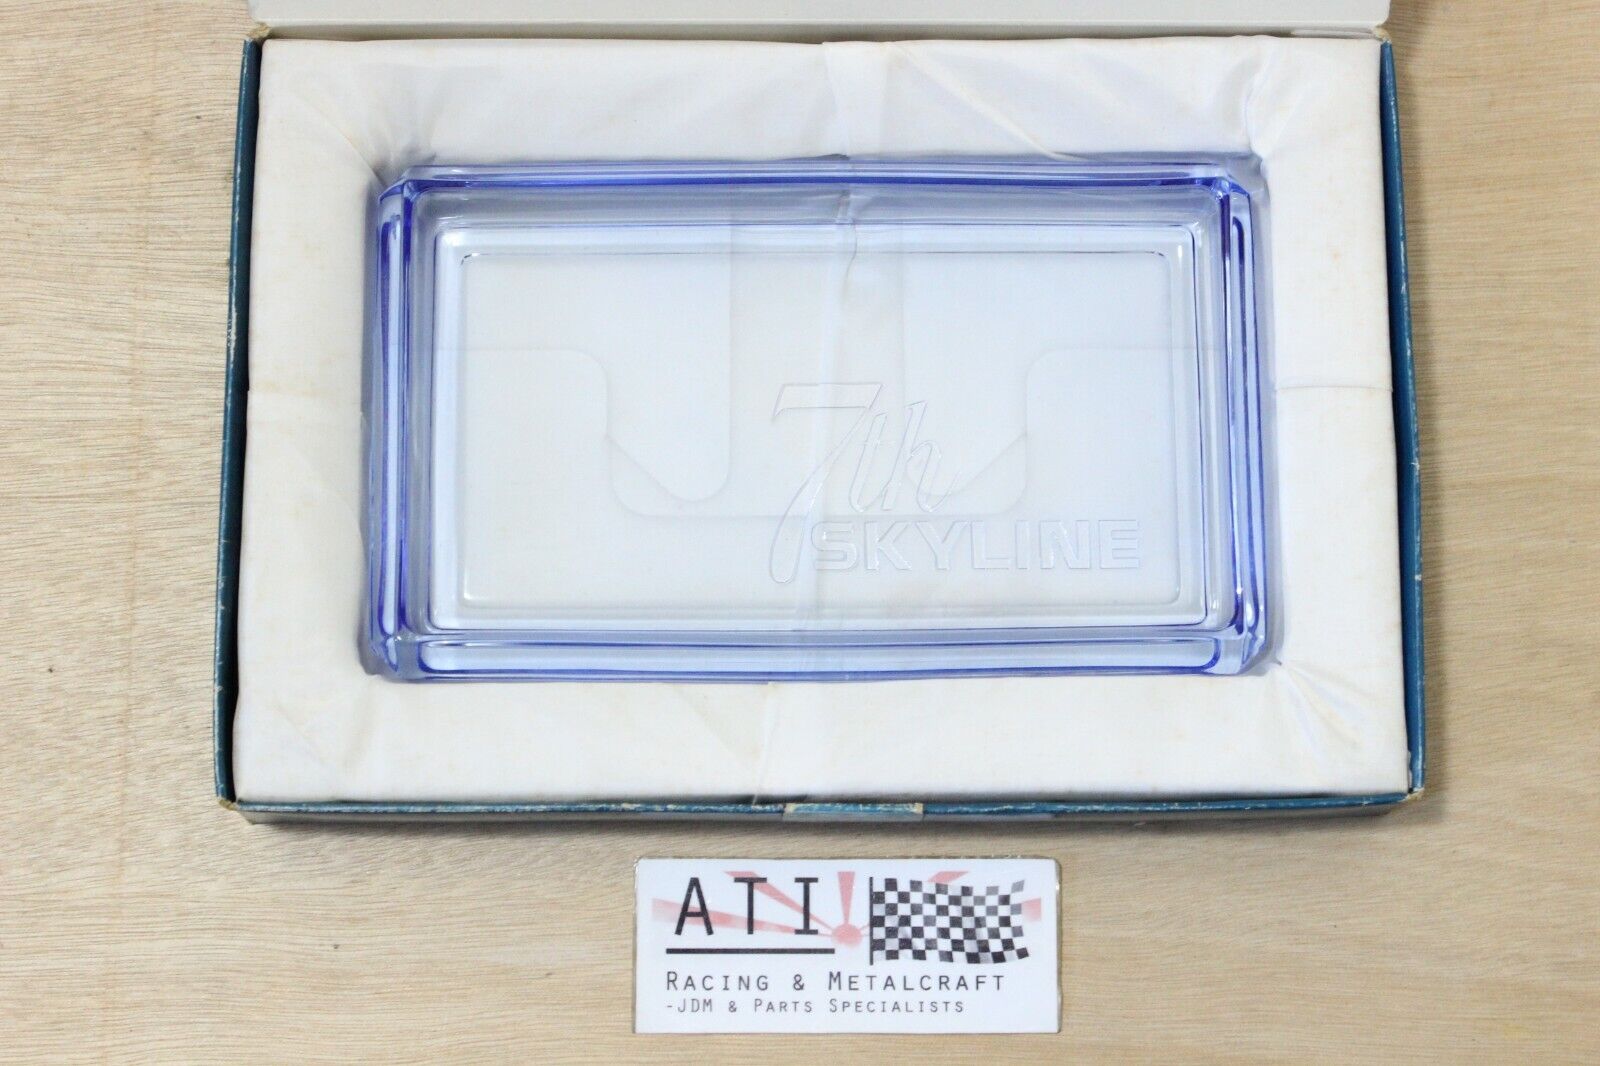 Vintage Nissan R31 Now Baltimore Mall on sale 7th Skyline Display Glass Ashtray Plate Blue